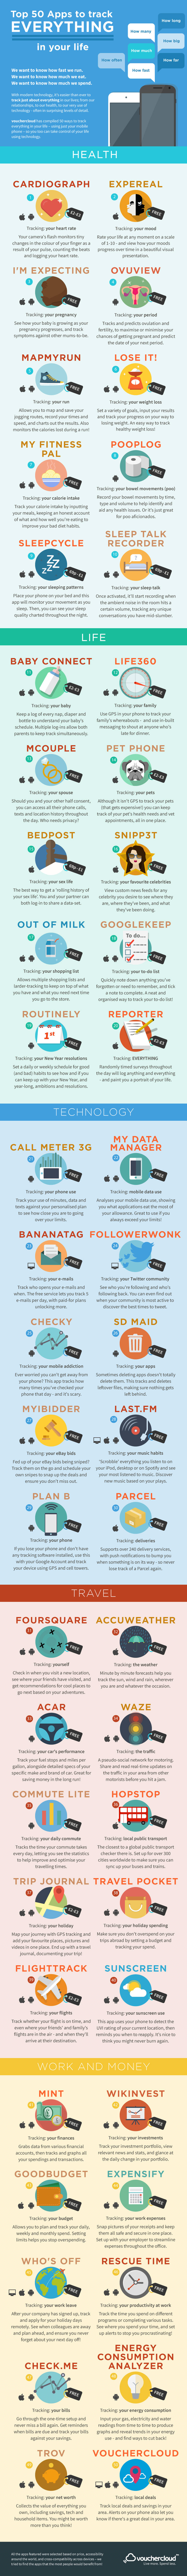 50 apps to track everything infographic